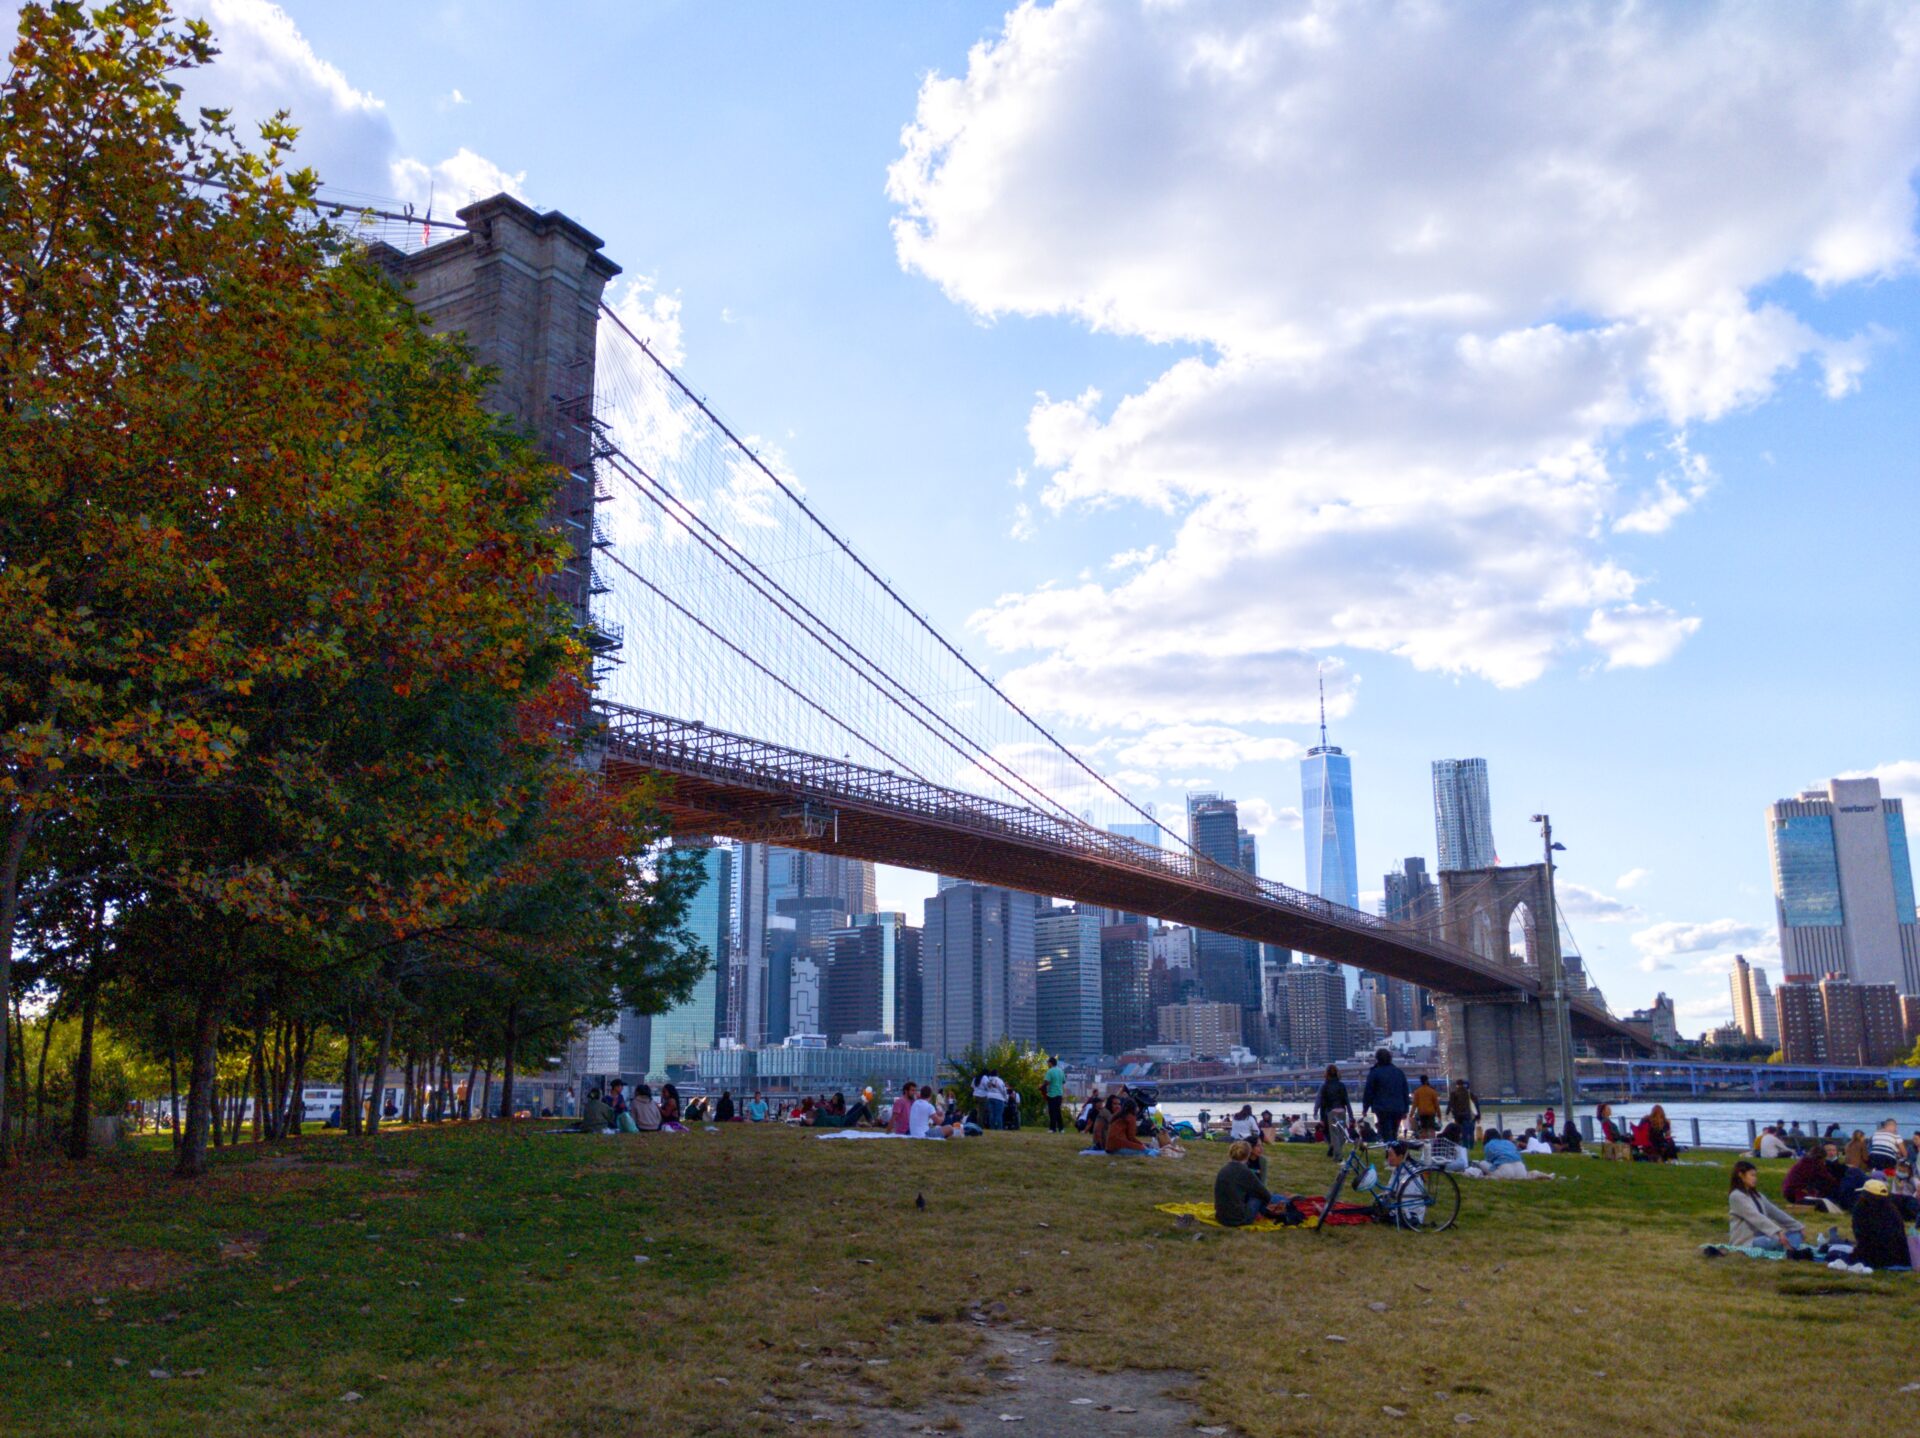 Brooklyn bridge goes to Financial District, people picnic on the Brooklyn side